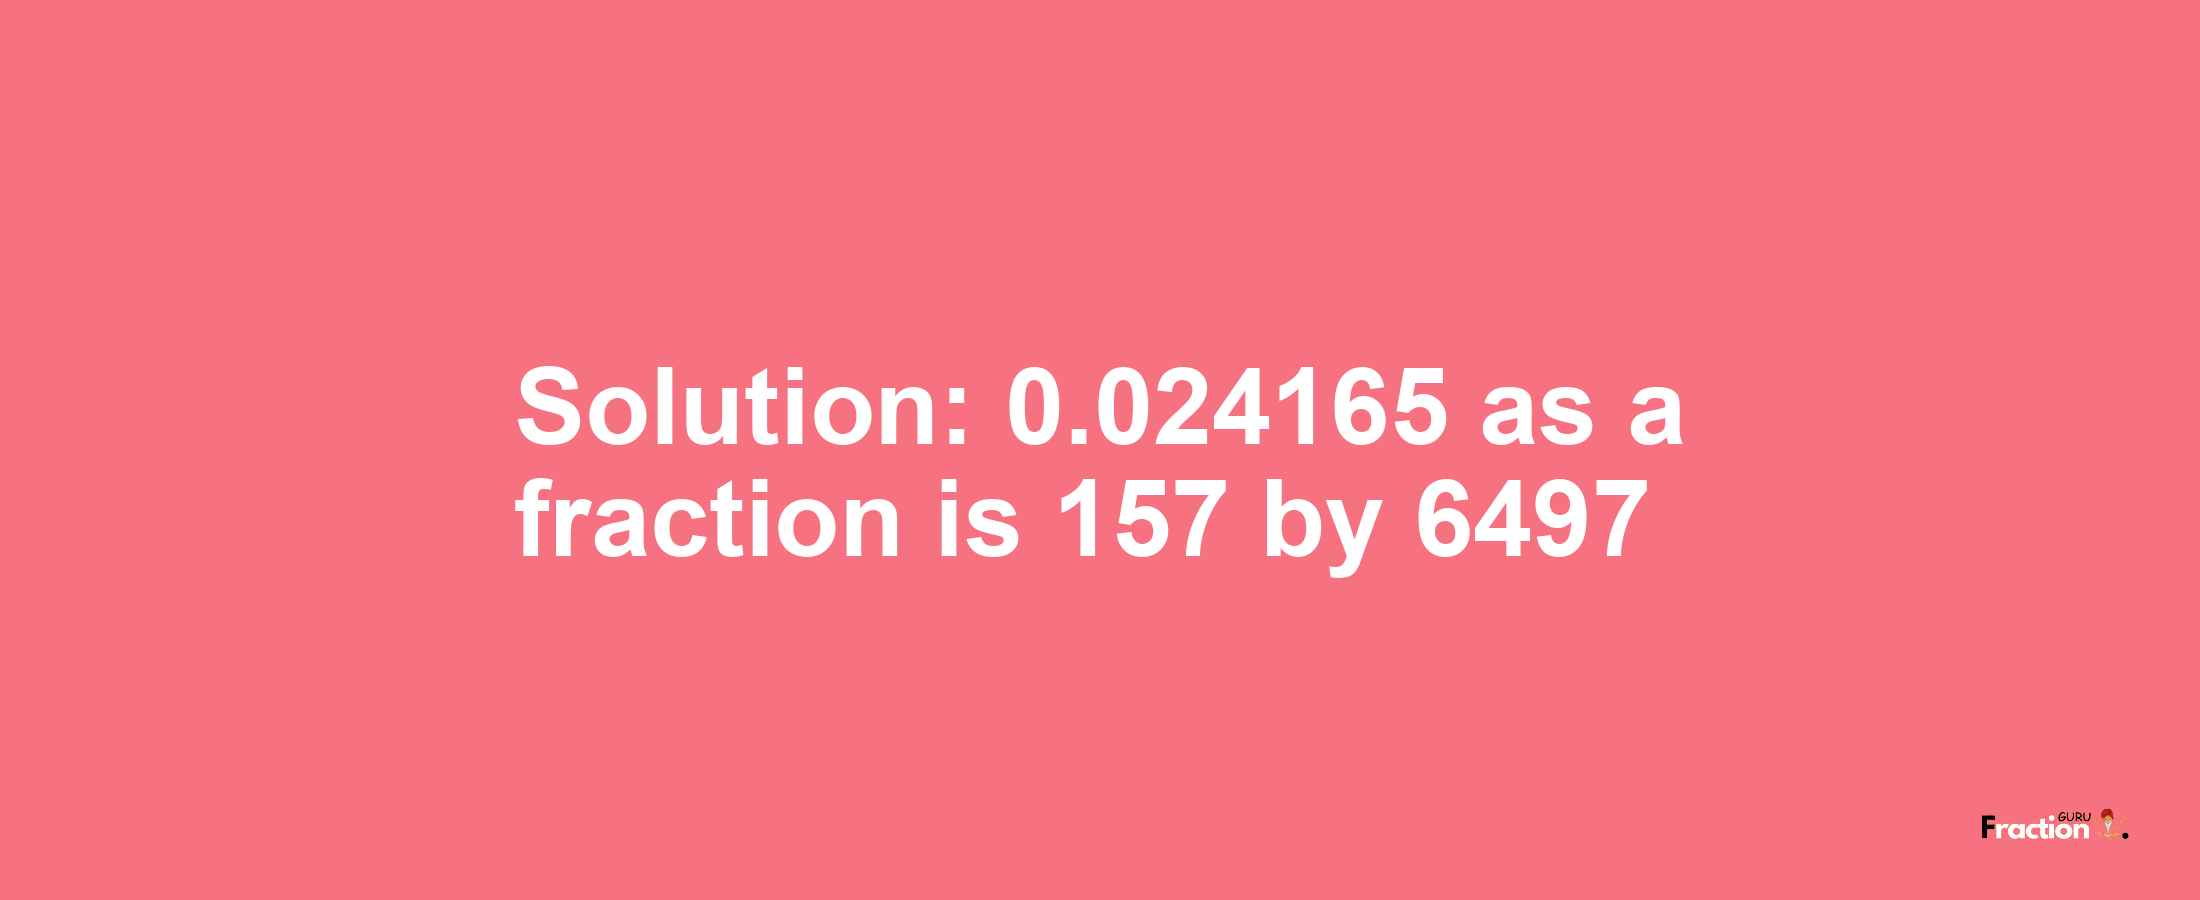 Solution:0.024165 as a fraction is 157/6497